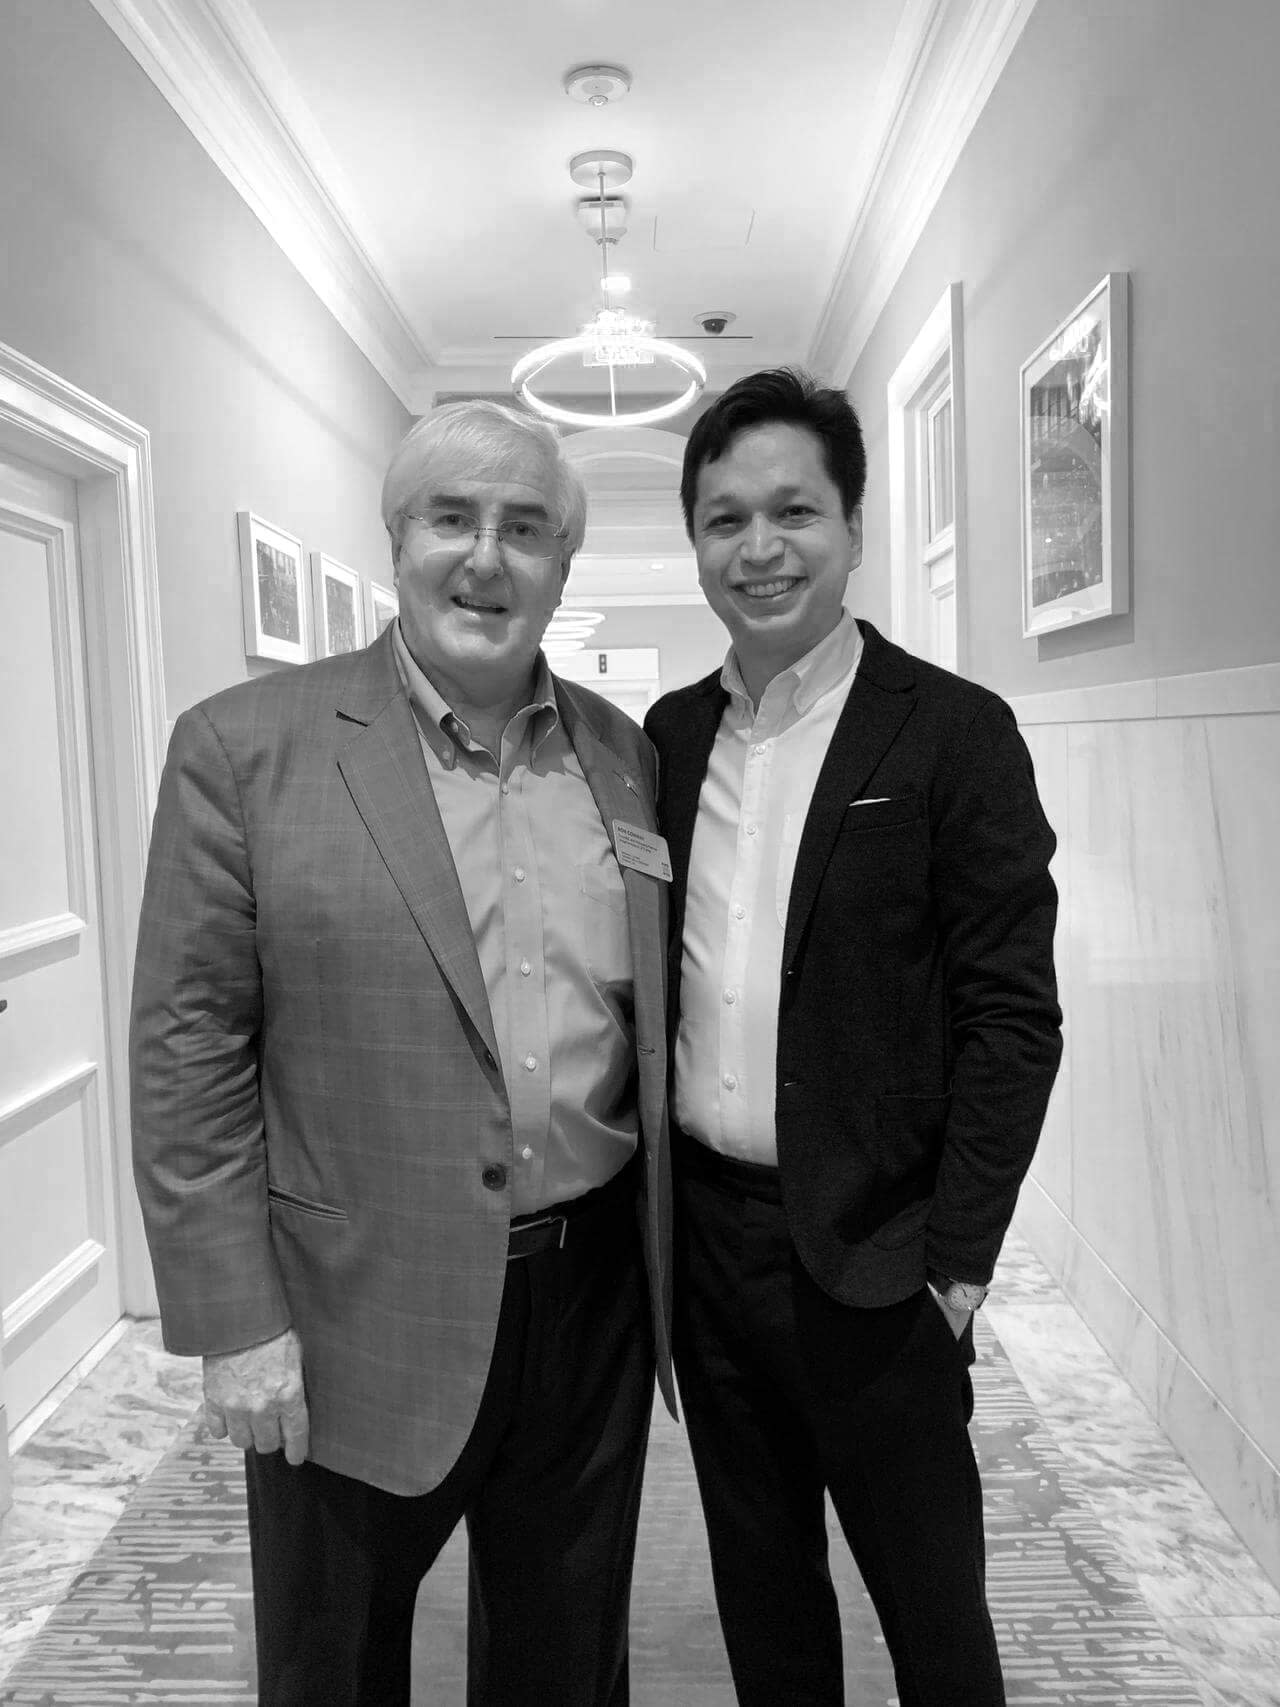 Pinterest Co-Founder and CEO Ben Silbermann & Ron Conway